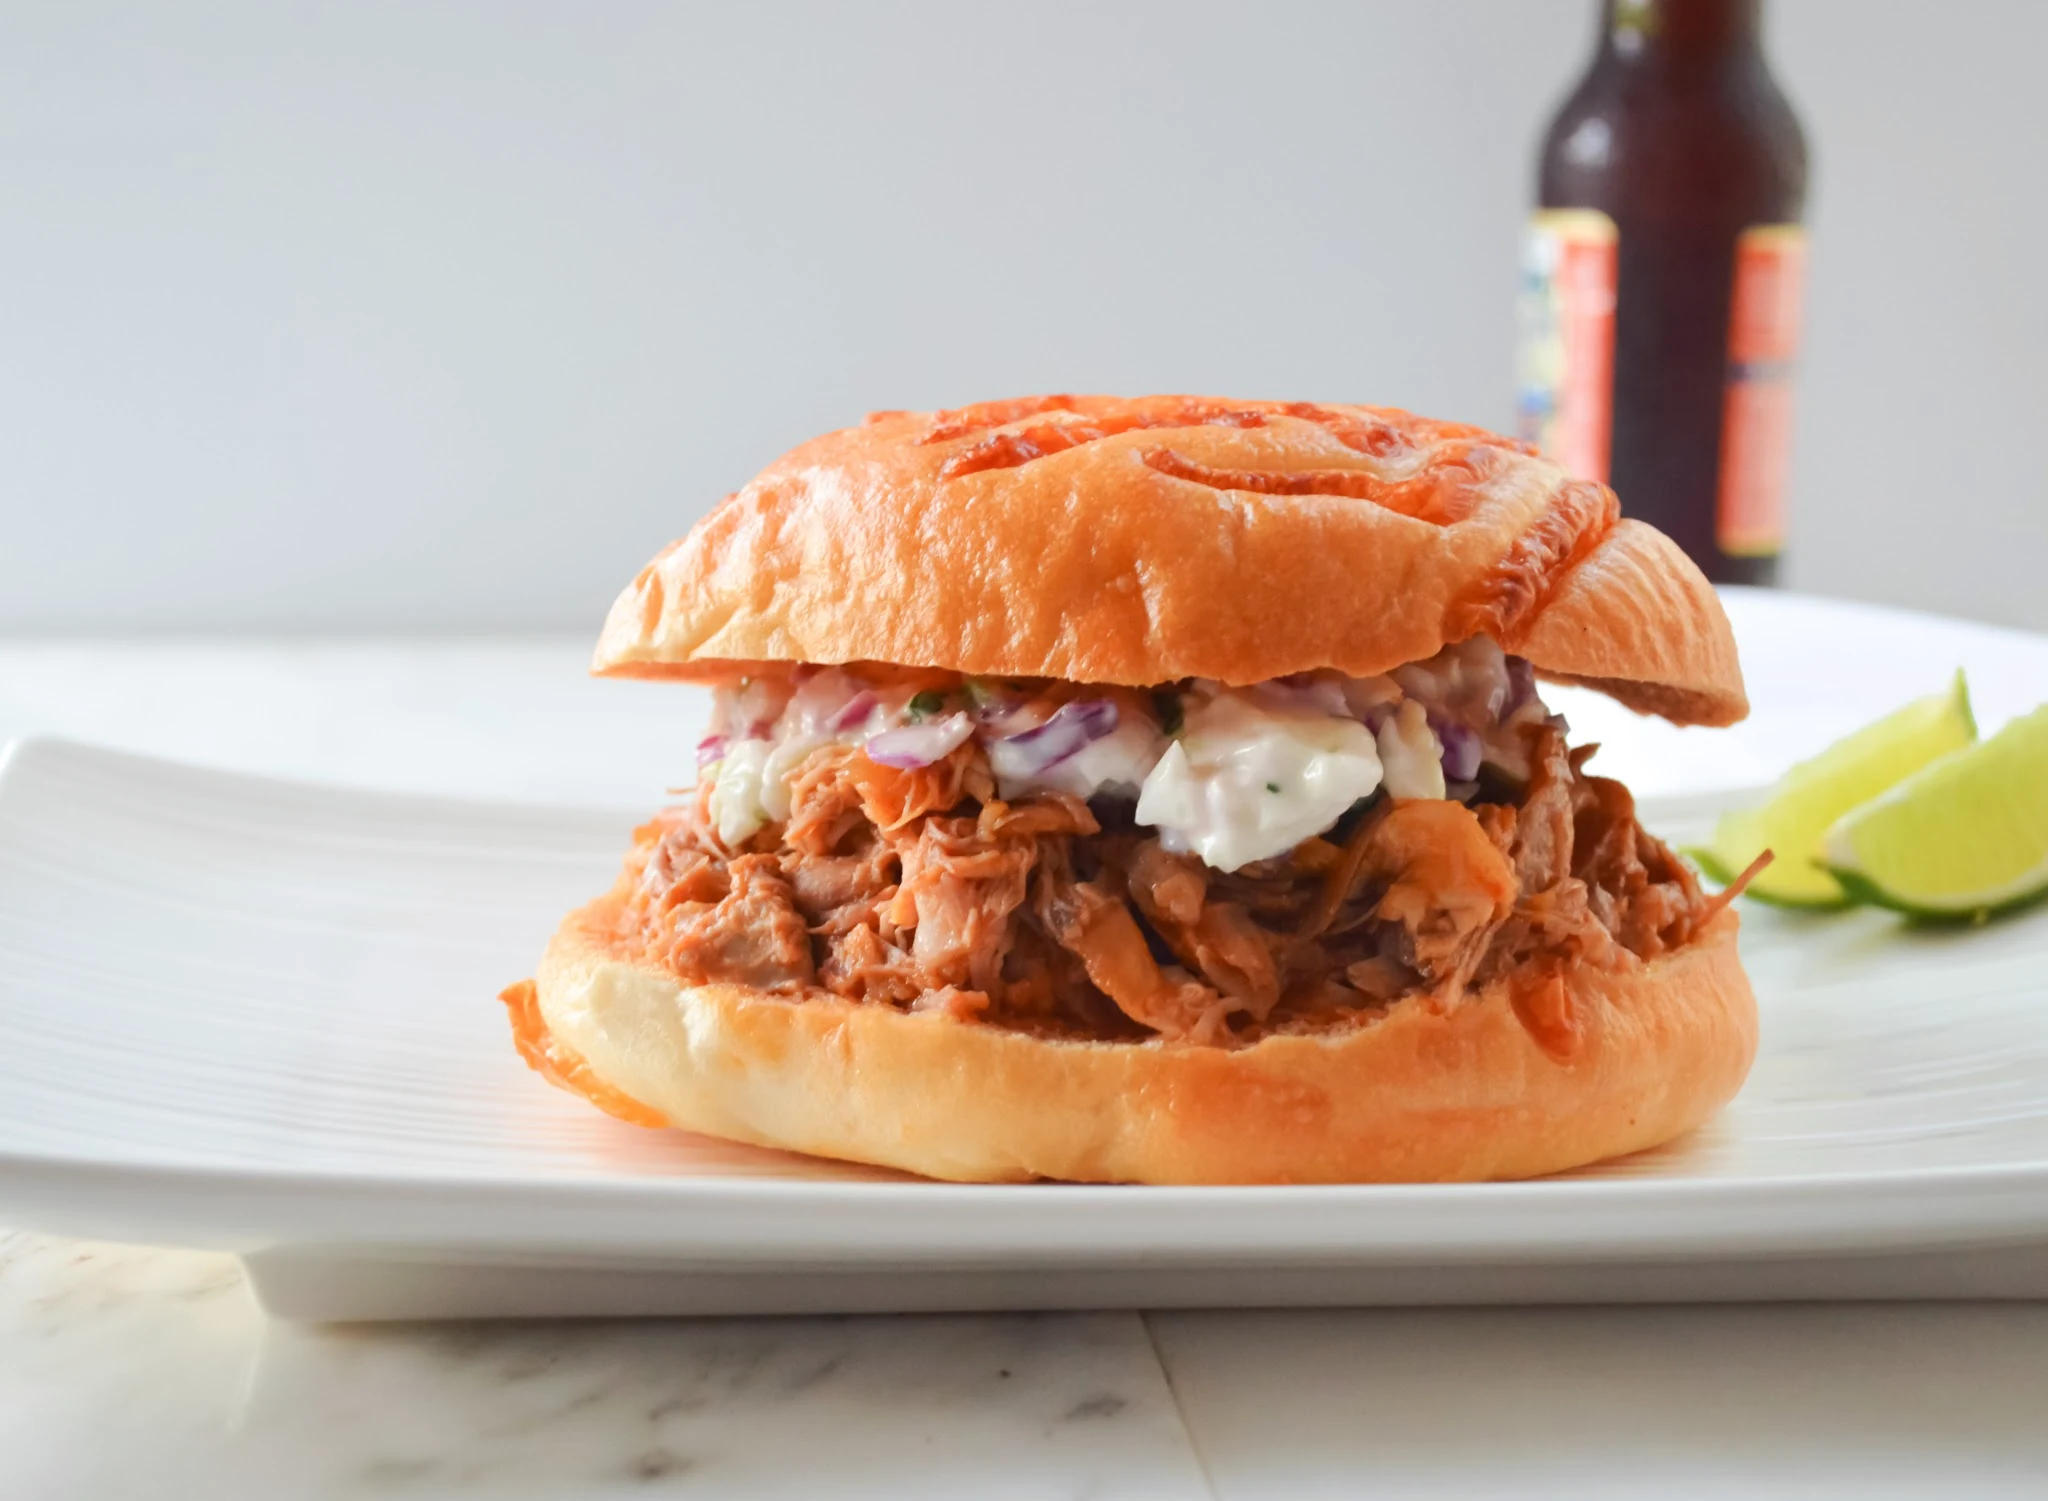 Slow-Cooked-Peach-Bourbon-Bbq-Pulled-Pork-Recipe-Toasted-Bun.jpg